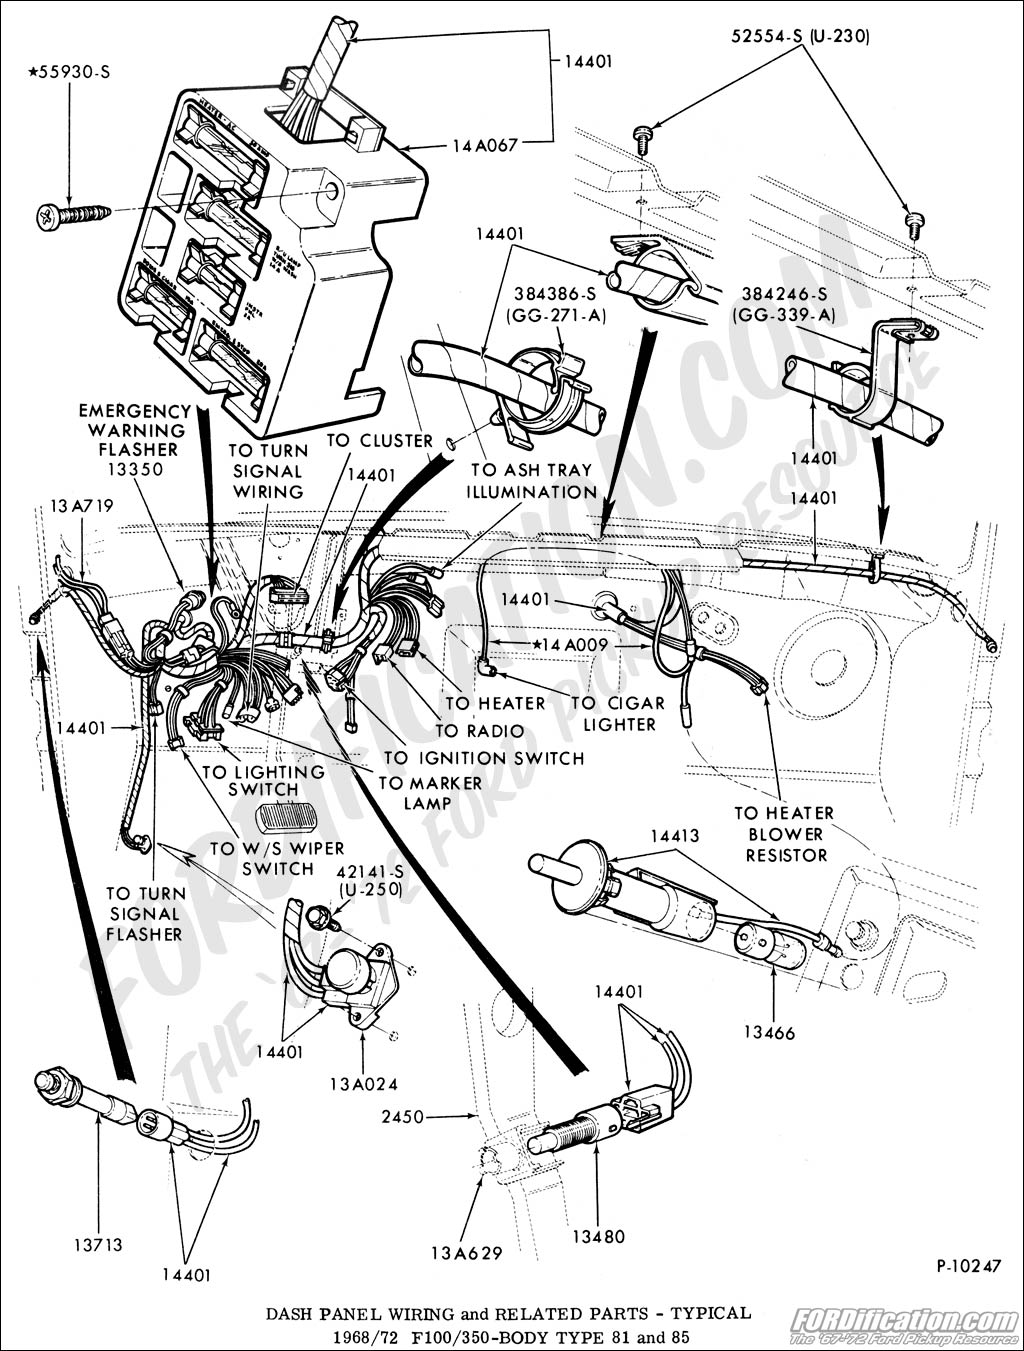 Wiring Harness 1965 Mustang Wiring Diagram from www.fordification.com